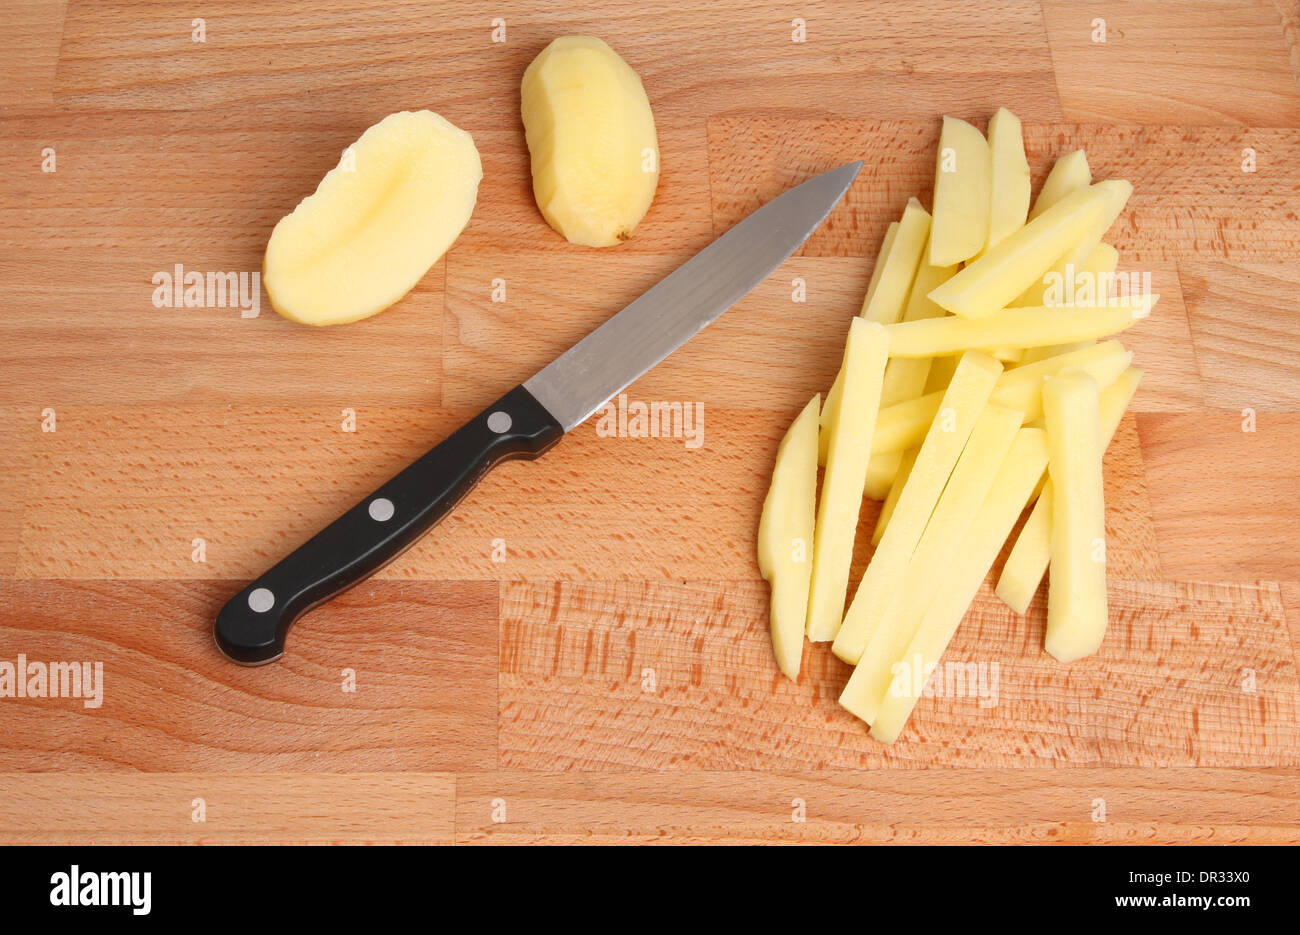 Cutting potato chips, knife and potato on a wooden board Stock Photo